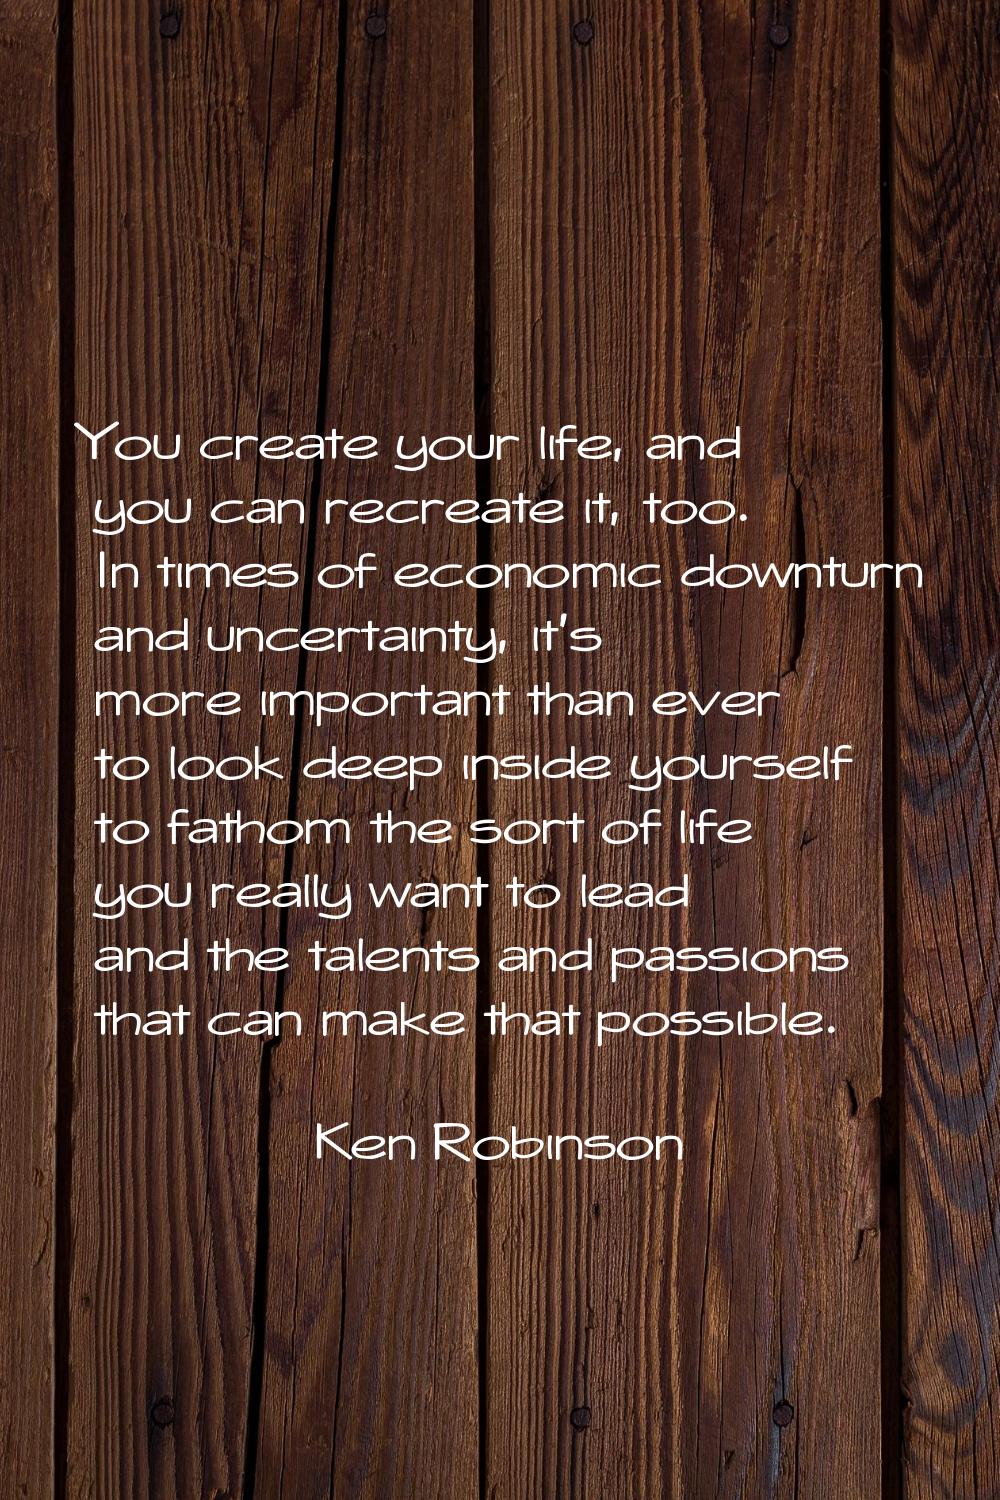 You create your life, and you can recreate it, too. In times of economic downturn and uncertainty, 